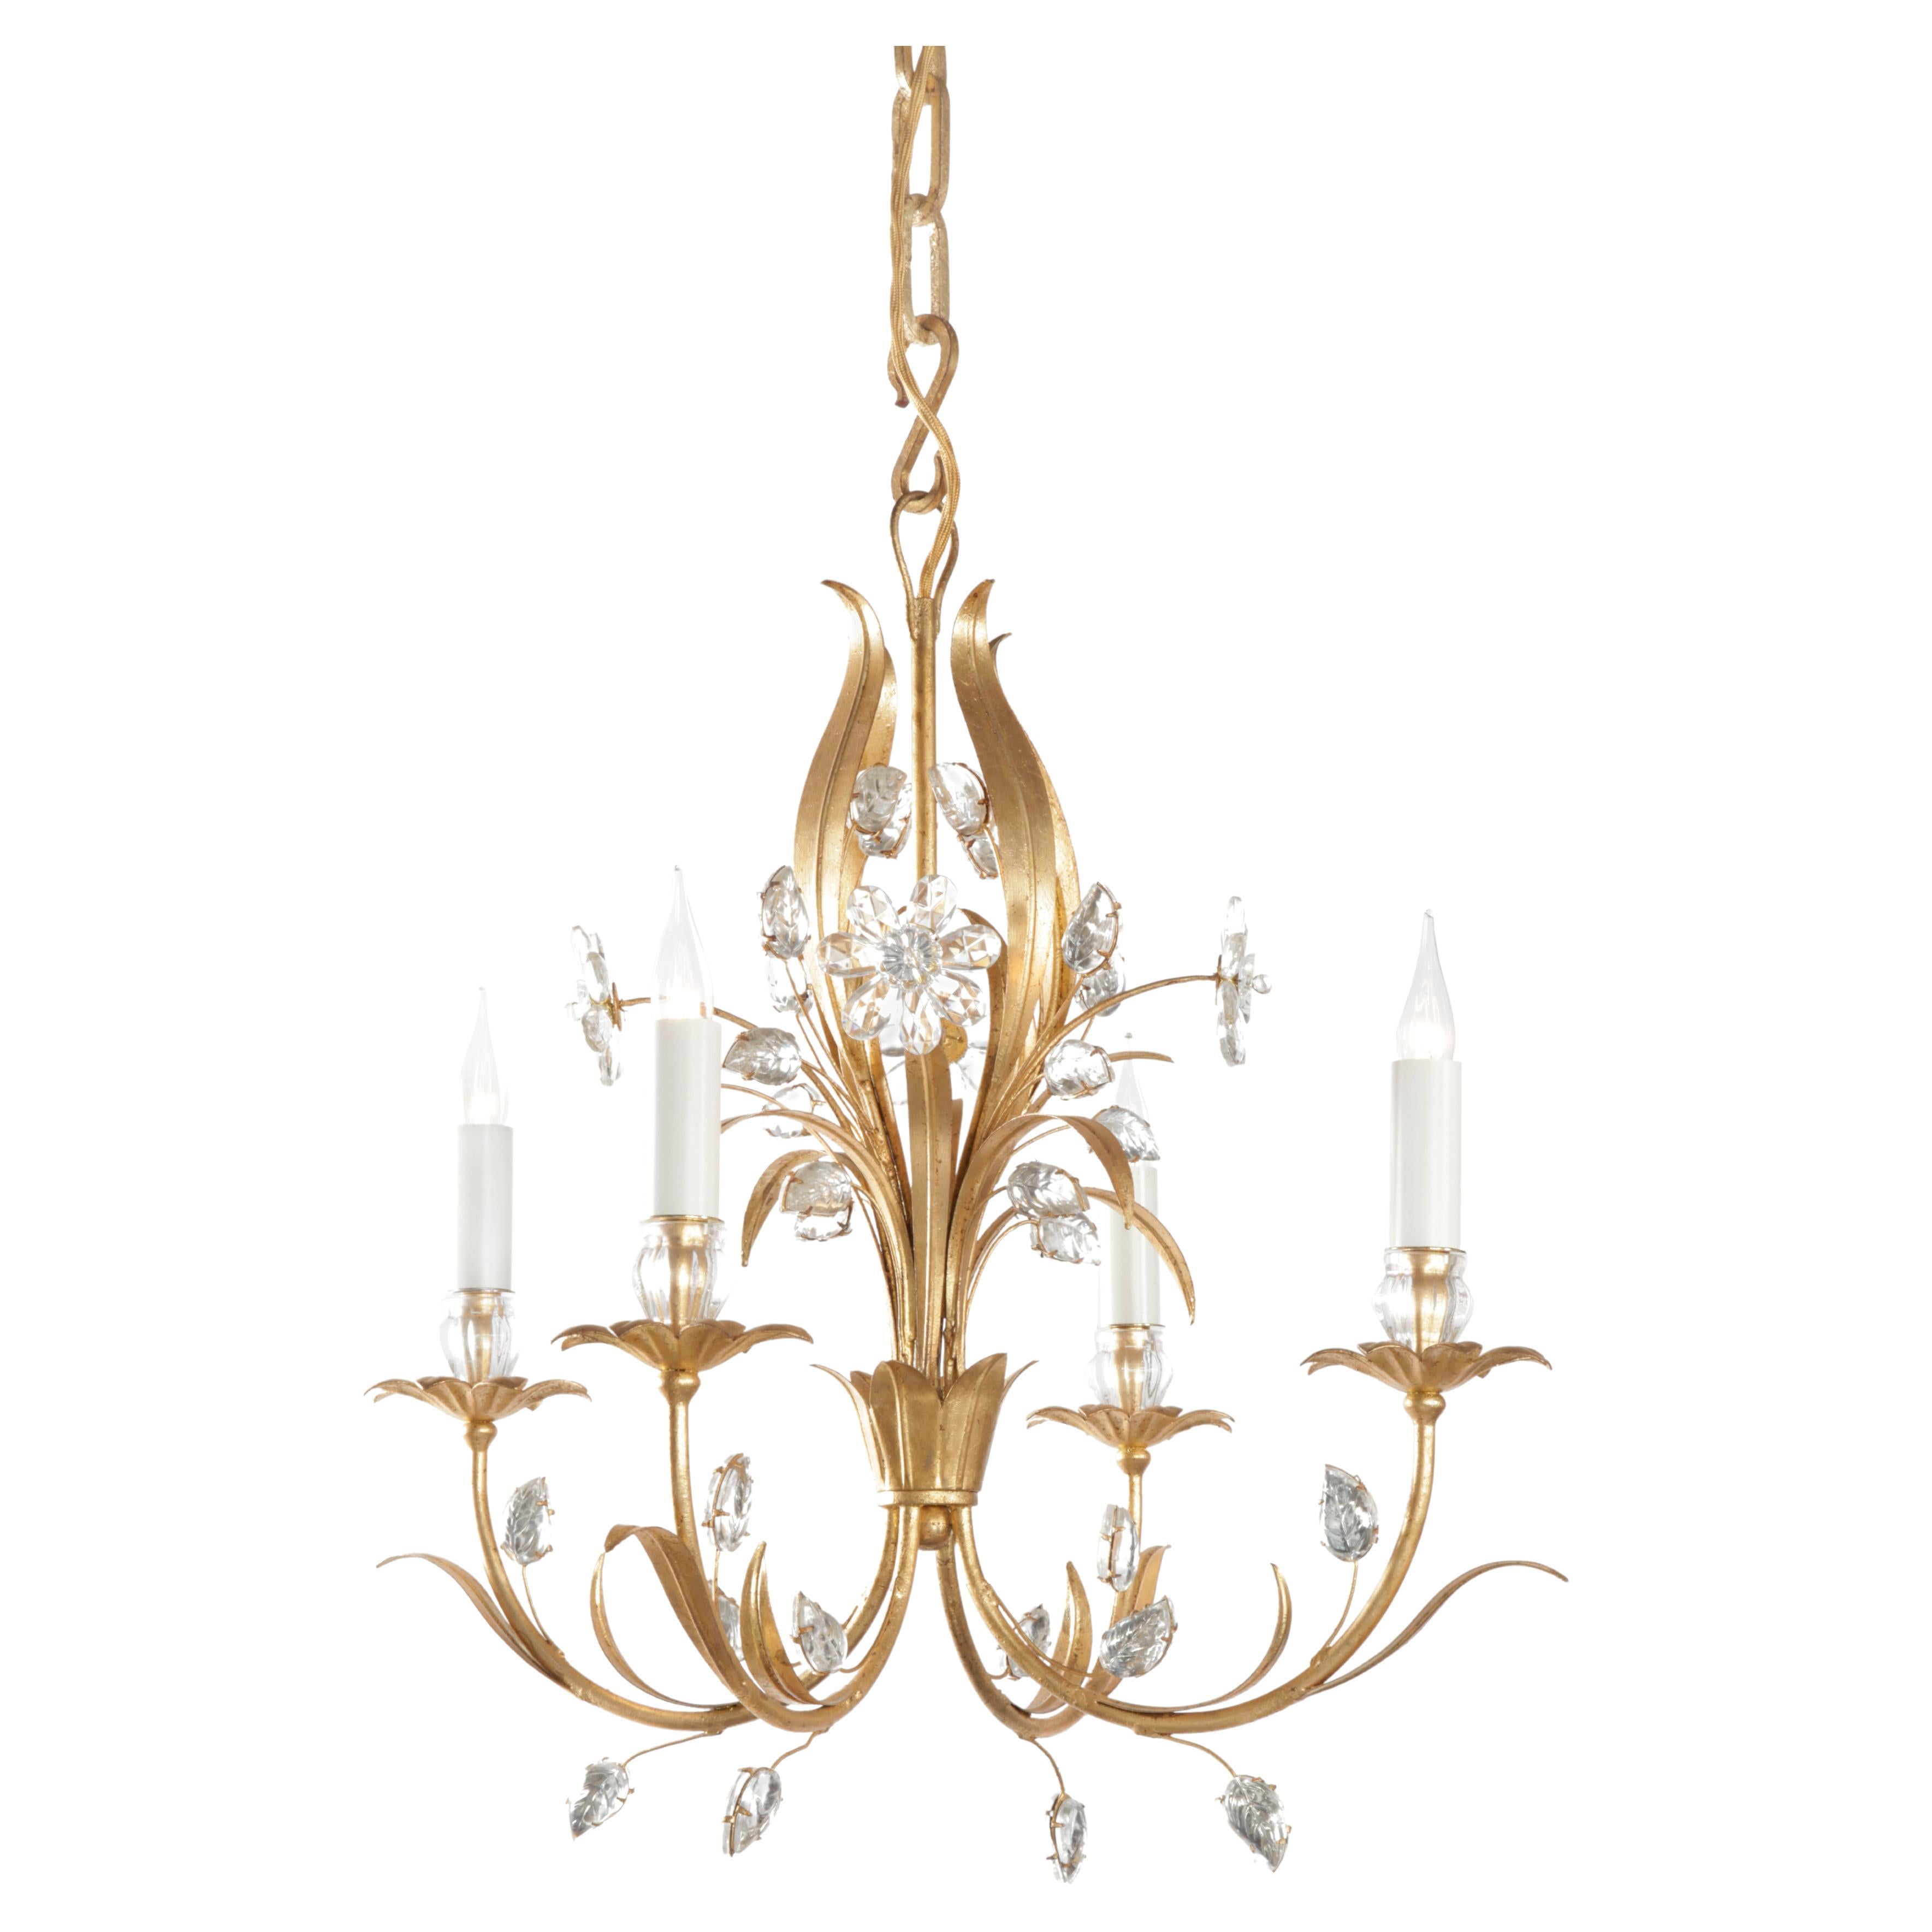 Certified Maison Bagues Chandelier, 4 Lights Iron & Crystal #00166 For Sale